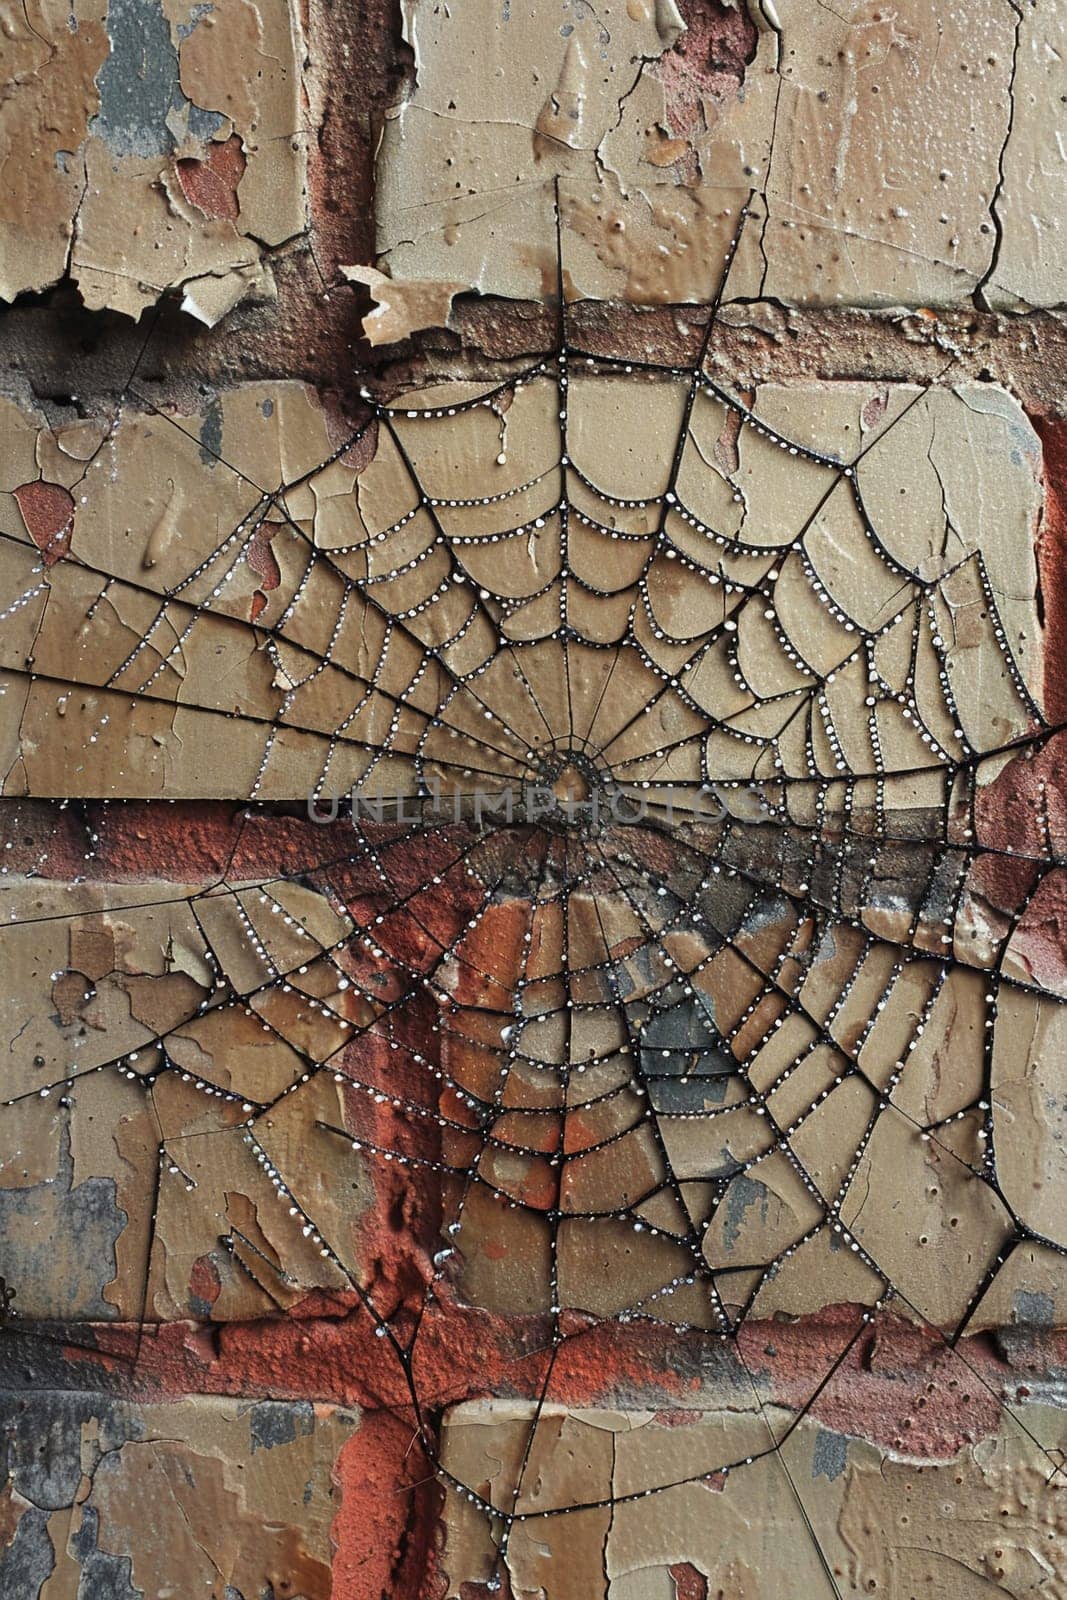 Glistening raindrops on a spider web, capturing the intricacy and beauty of nature. Old brick wall with peeling paint, great for vintage and rustic background themes.